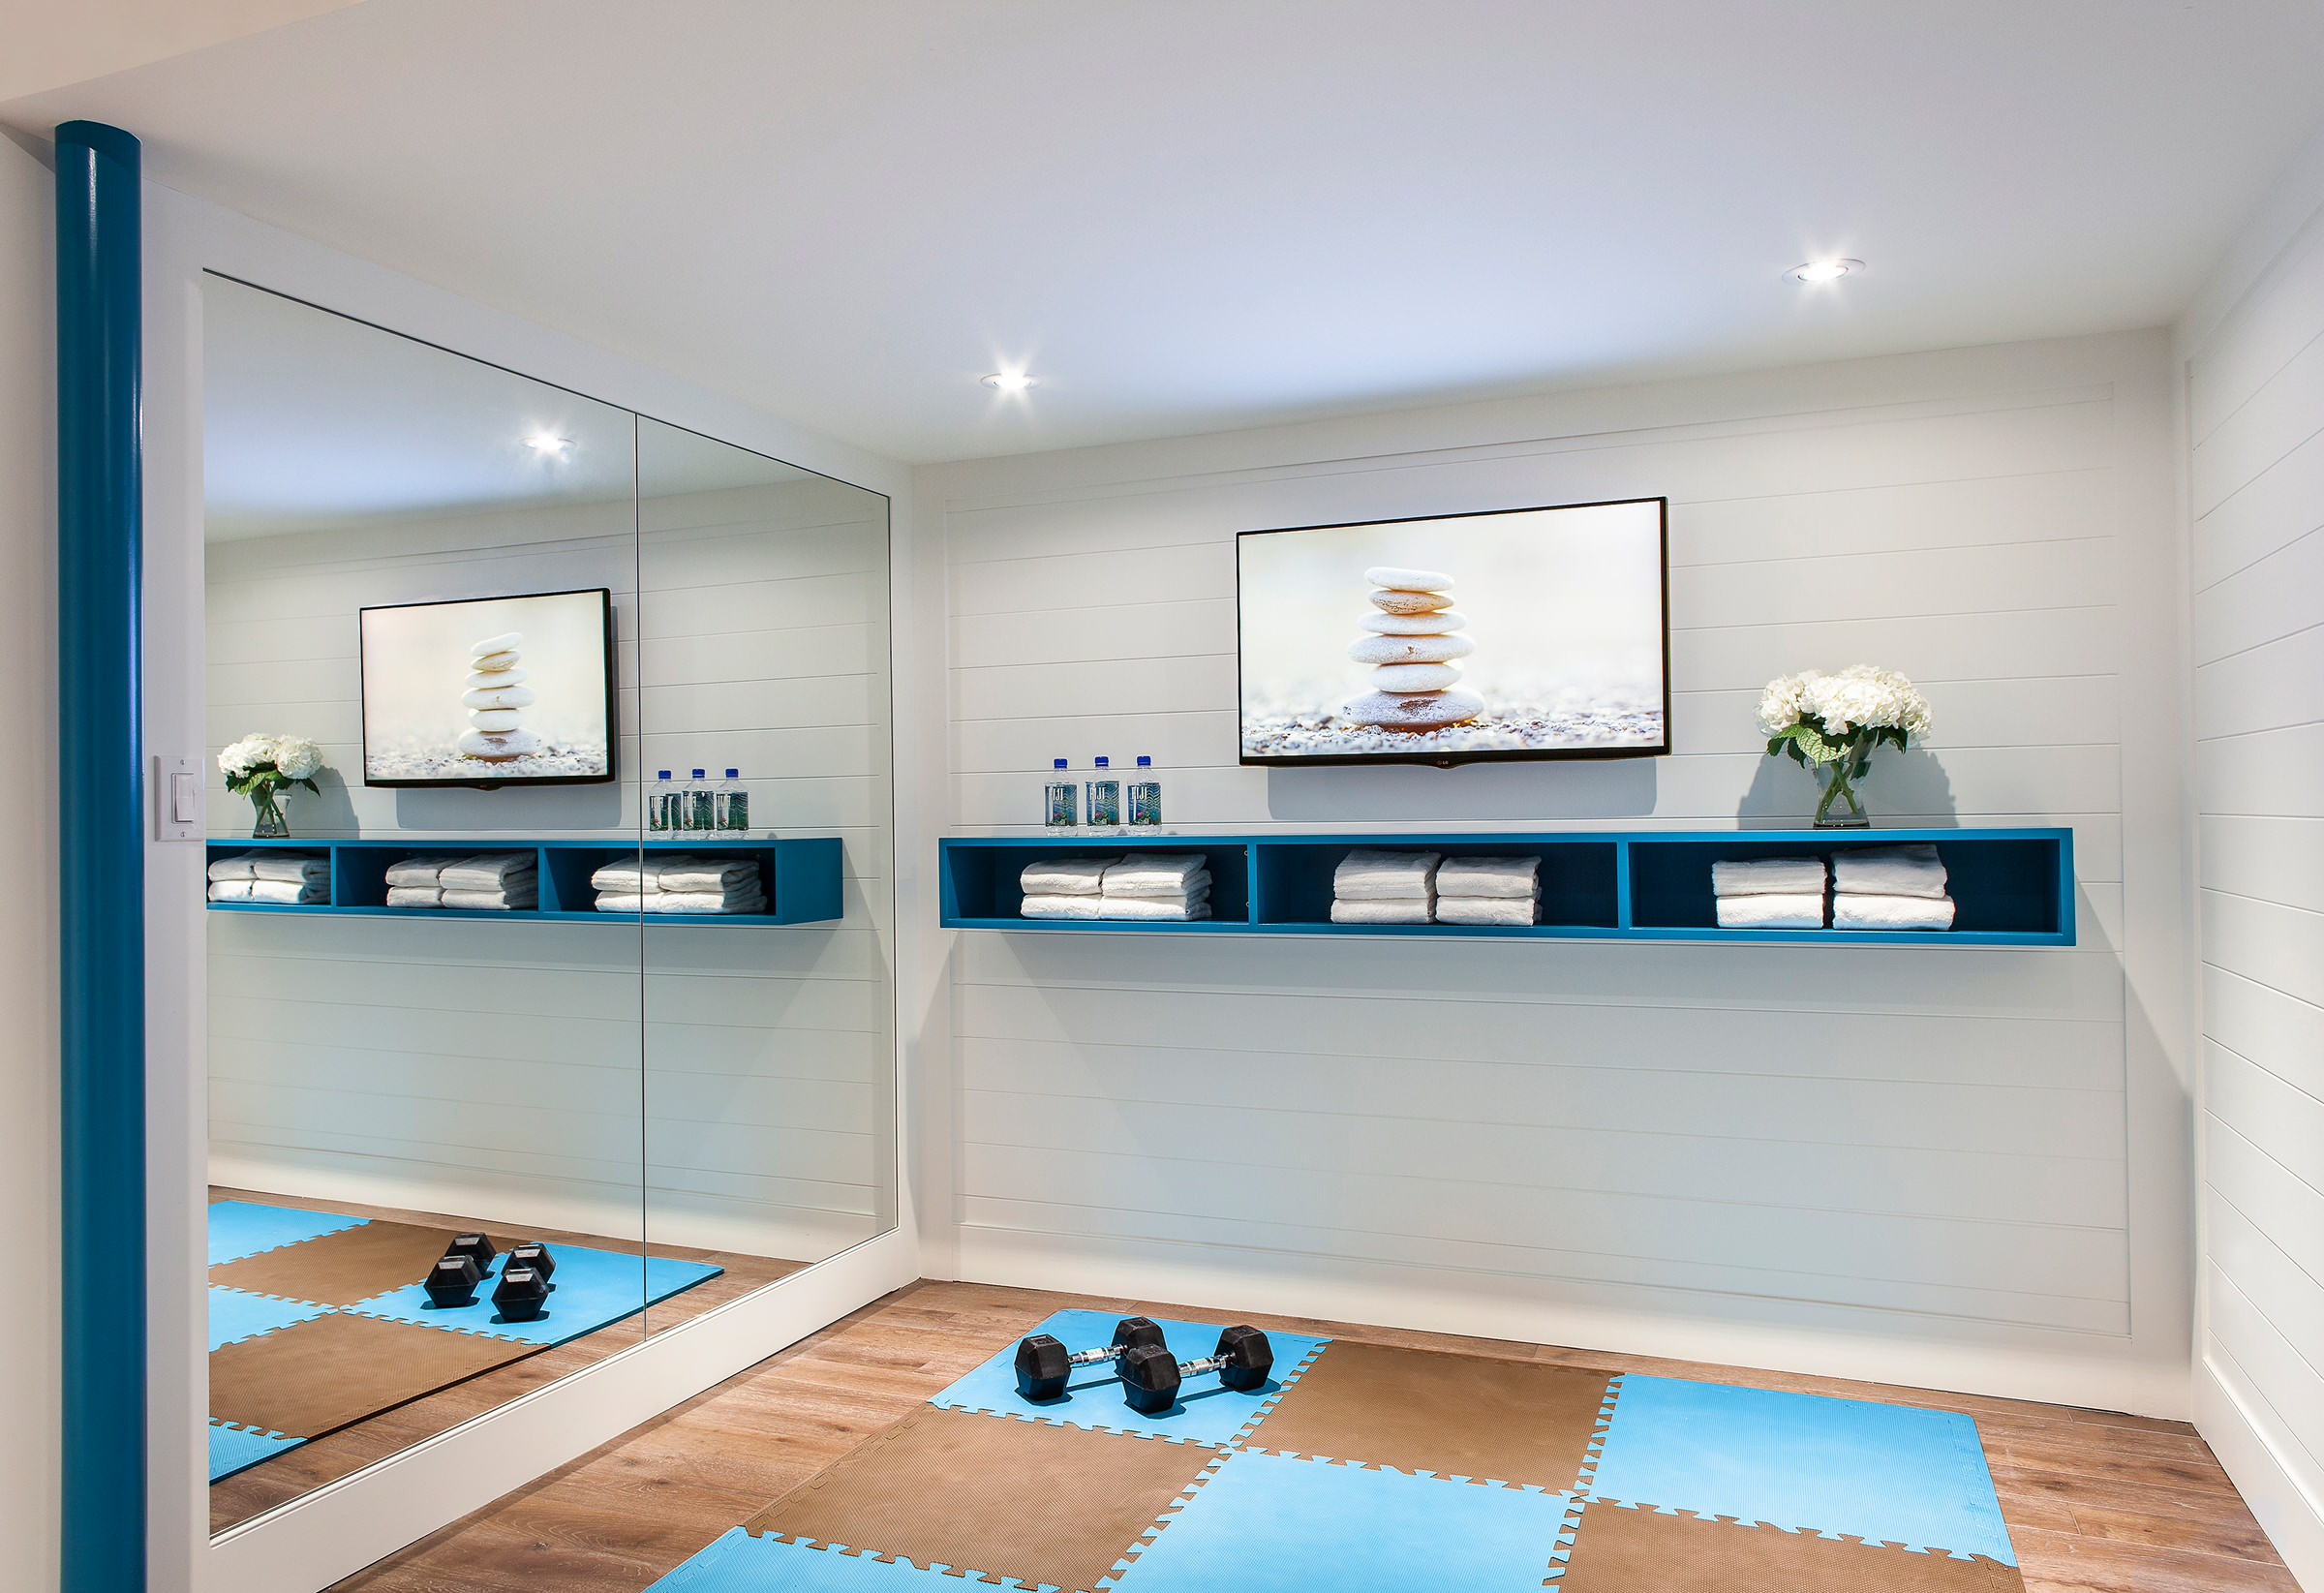 75 Beautiful Small Home Gym Pictures Ideas July 2021 Houzz